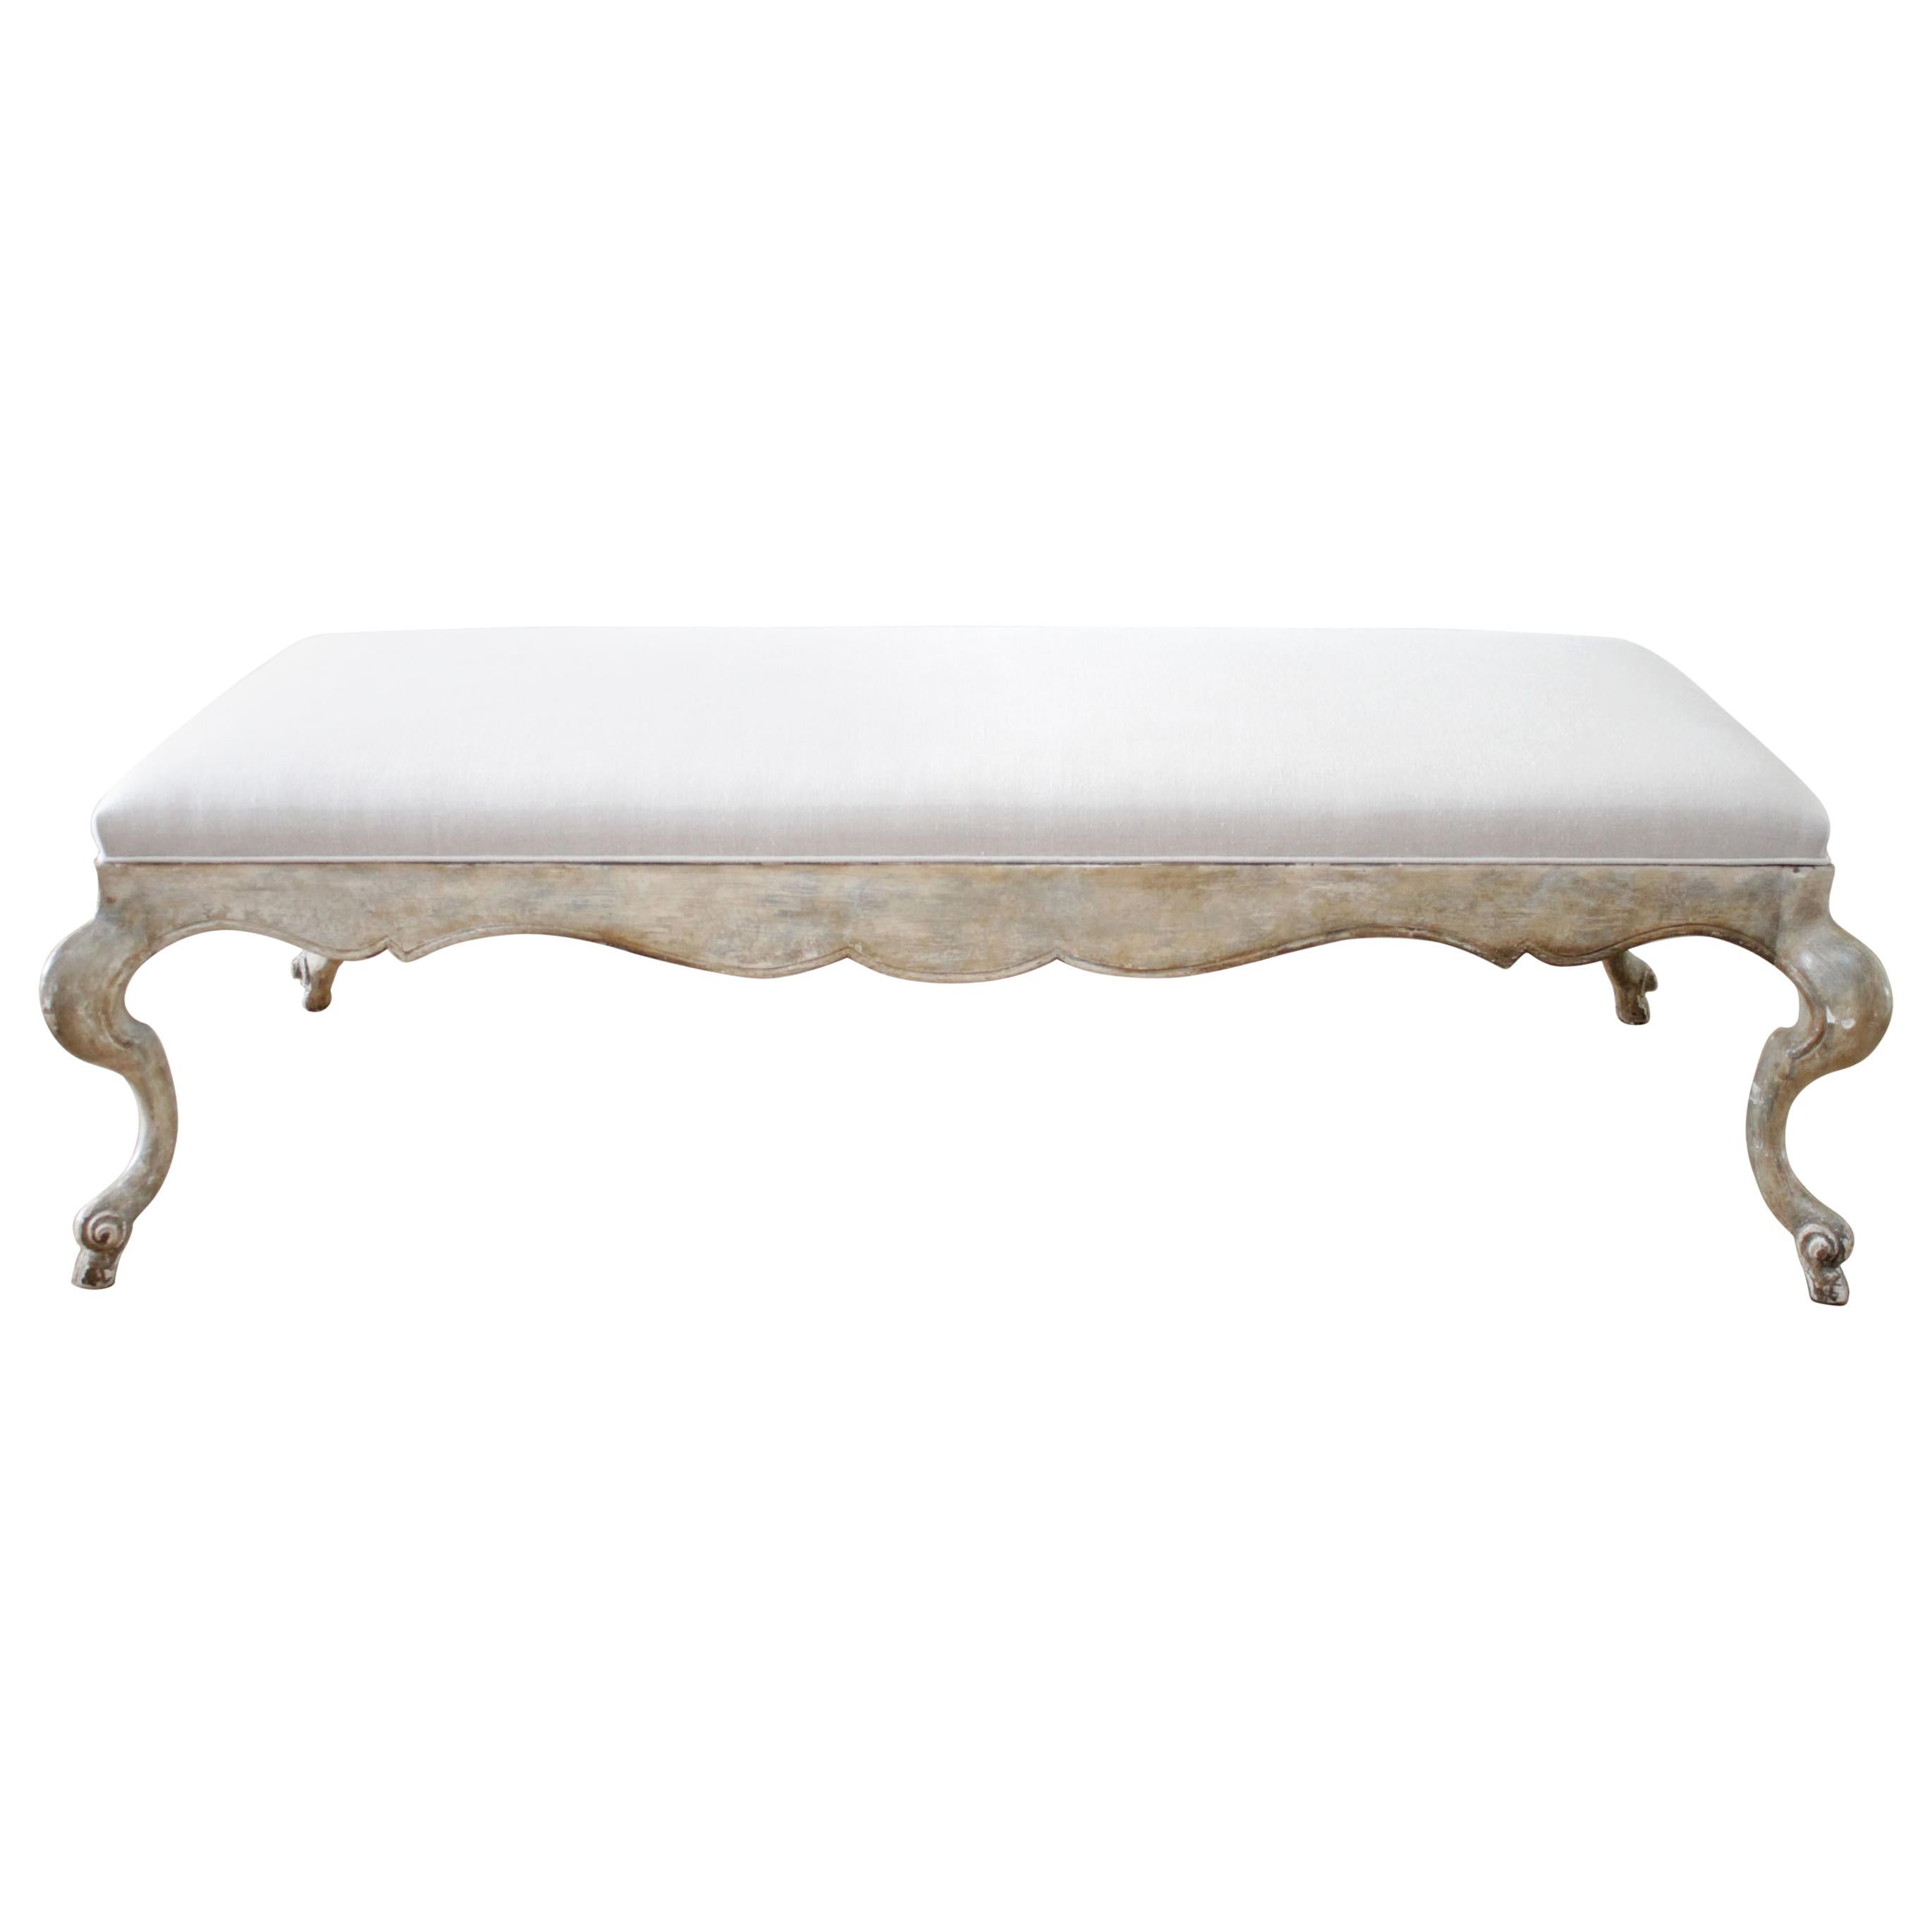 French Style Painted Cocktail Ottoman Table with Upholstered Linen Top